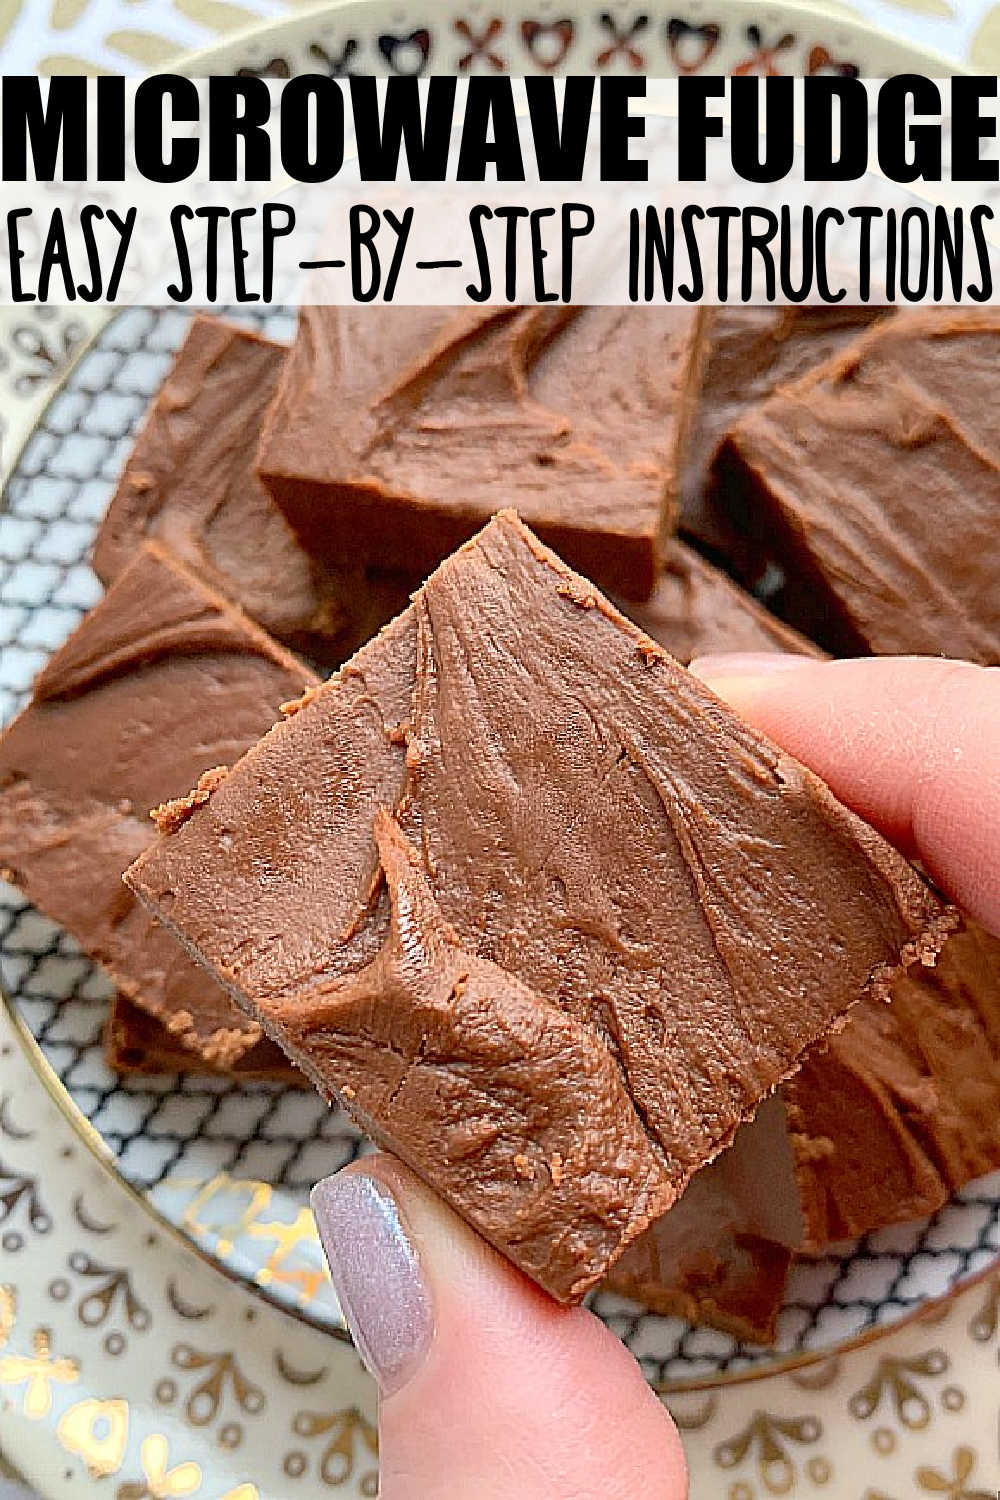 My Mom's recipe for Microwave Fudge is the best, most creamy and dreamy fudge you'll ever make. It's foolproof and customizable for gift giving. via @foodtasticmom